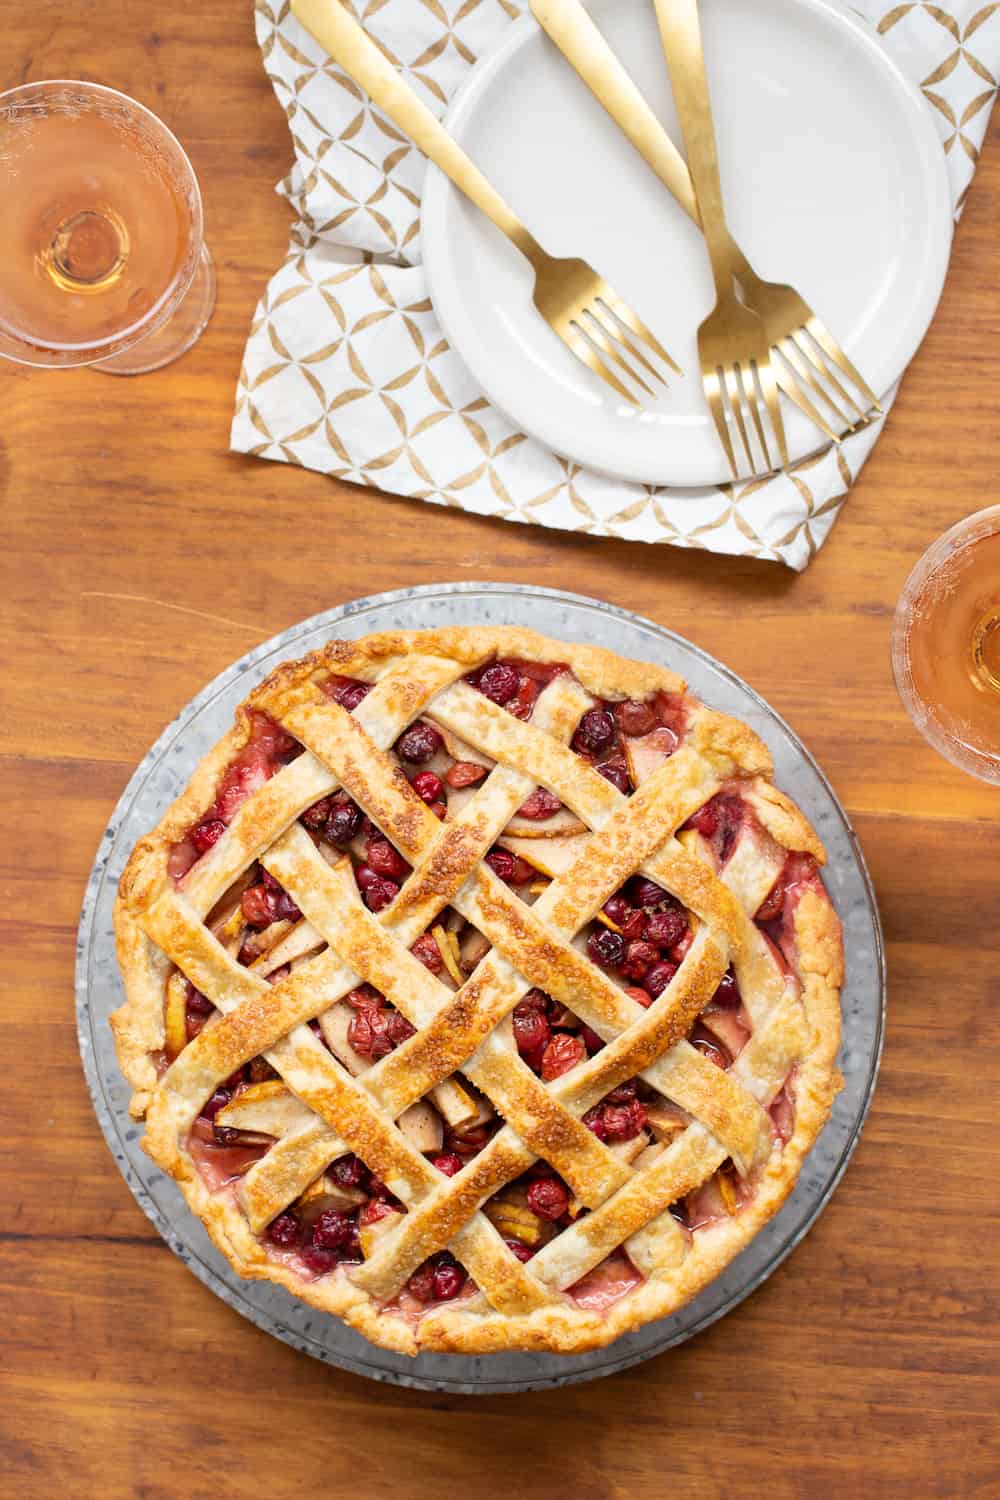 Cherry Cranberry Pear Pie: Summer and Fall in One Crust